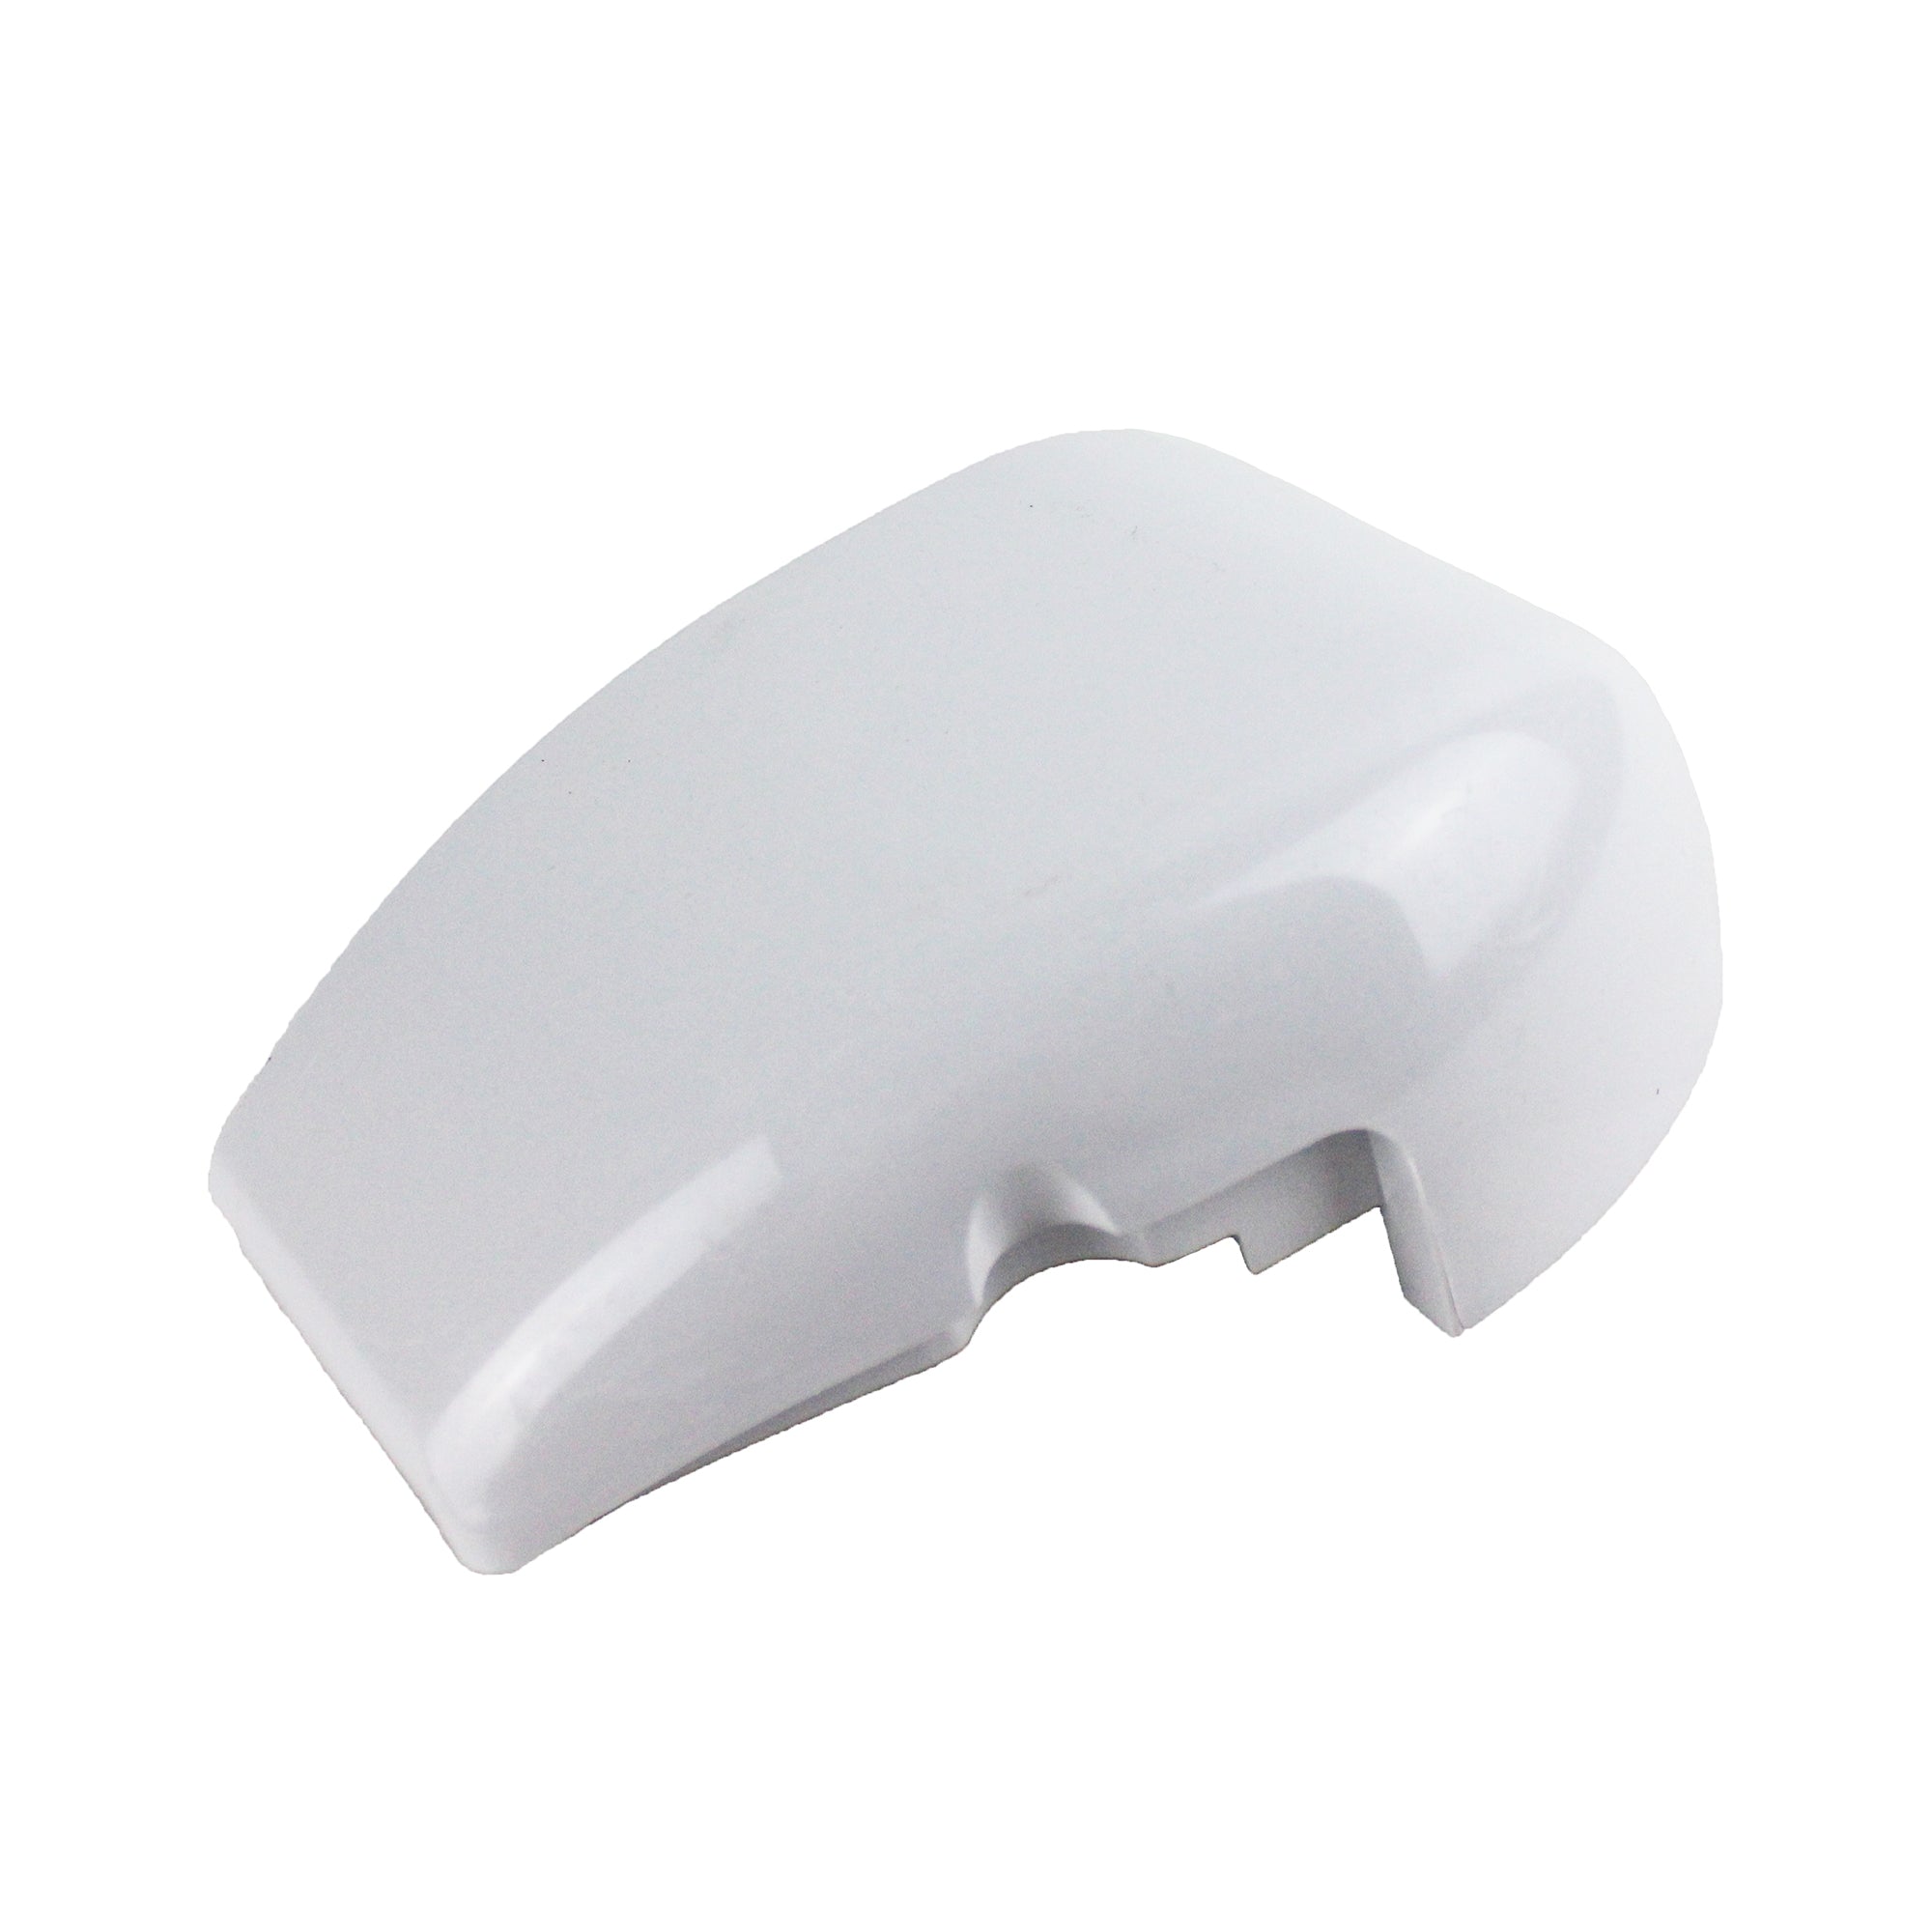 Dometic 3312800.000B Left Hand LH Outer Awning Cover, White 200 & 231 Series, 9108557292